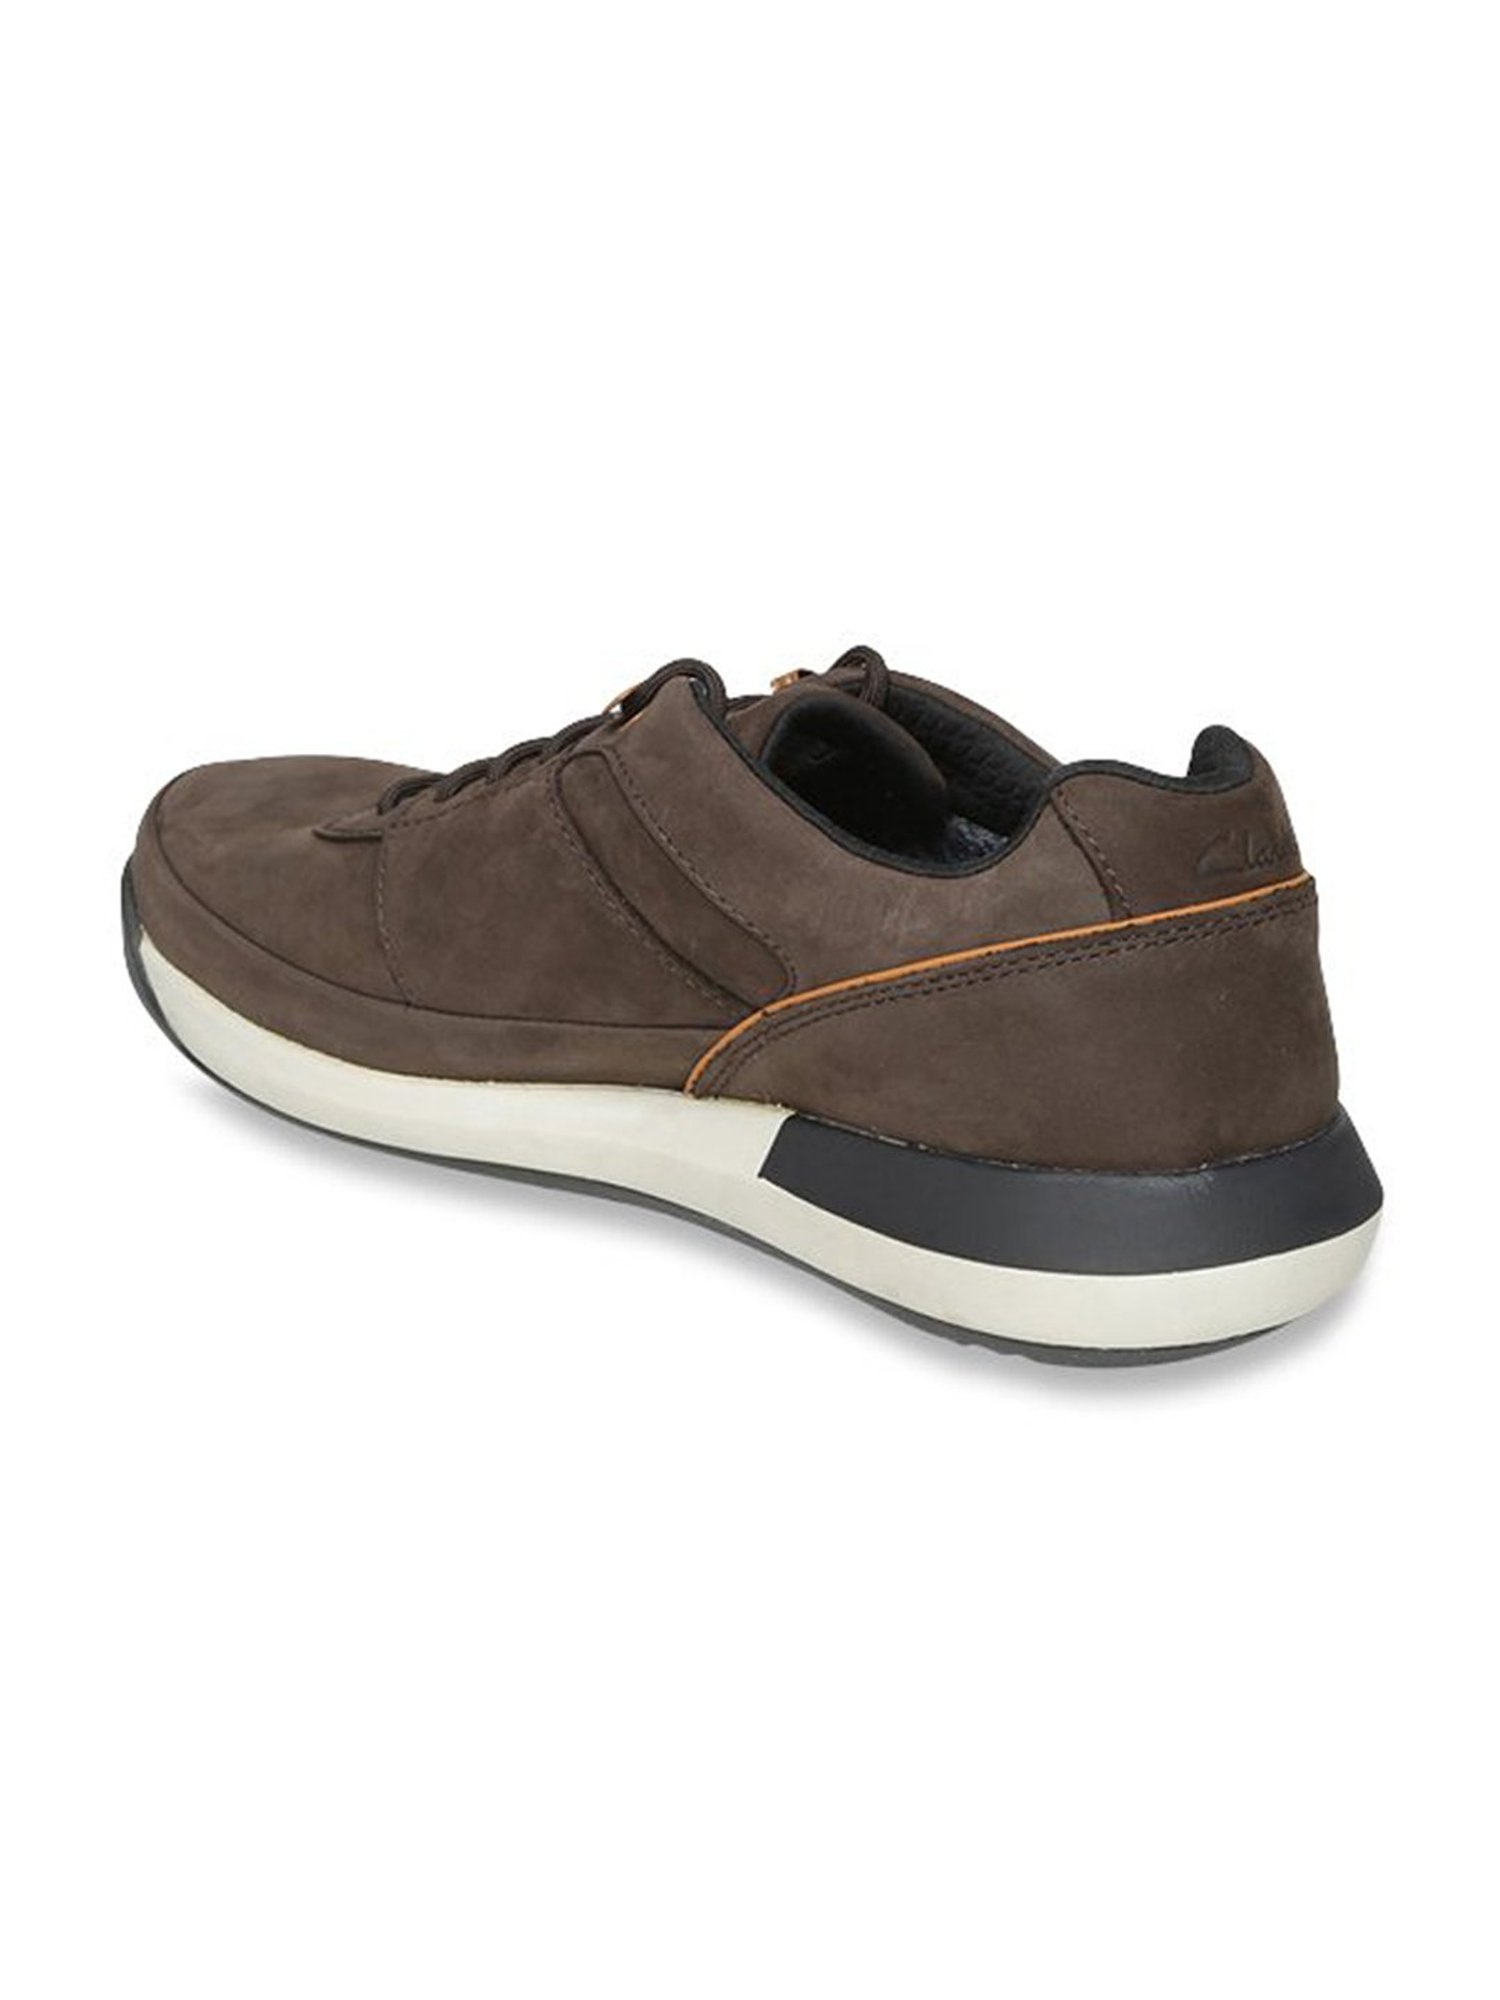 Buy Clarks Johto Lace GTX Brown Sneakers for at Price @ CLiQ